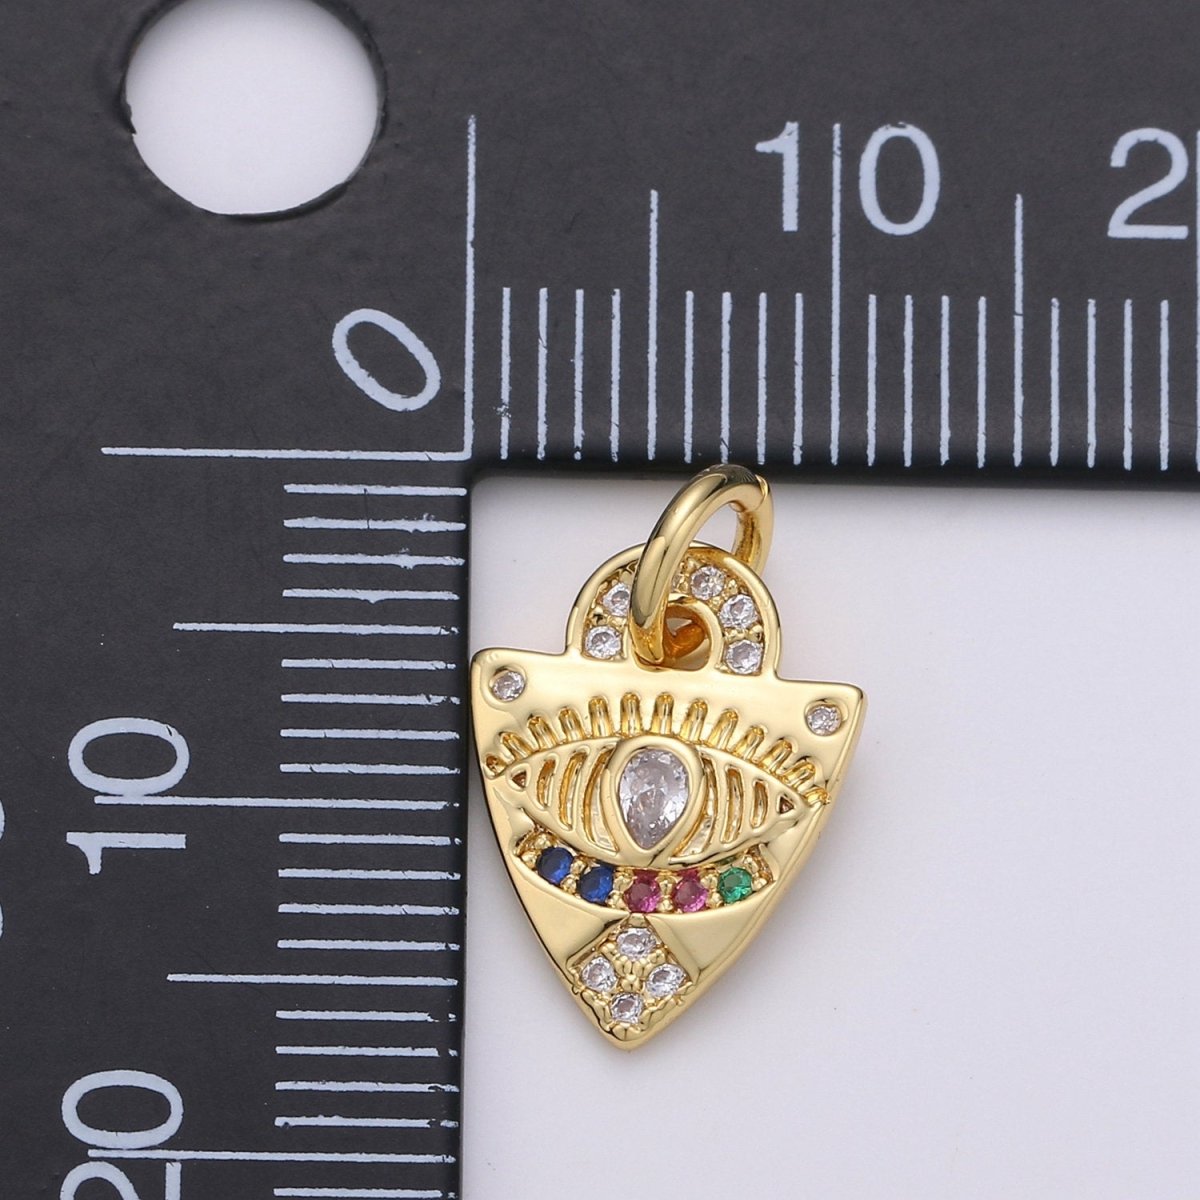 Dainty Charm 24k Gold Filled Micro Pave Evil Eye Pendant Charm, Rainbow Eye Shield CZ Pendant Charm, For Protection Amulet Jewelry, D-360 - DLUXCA